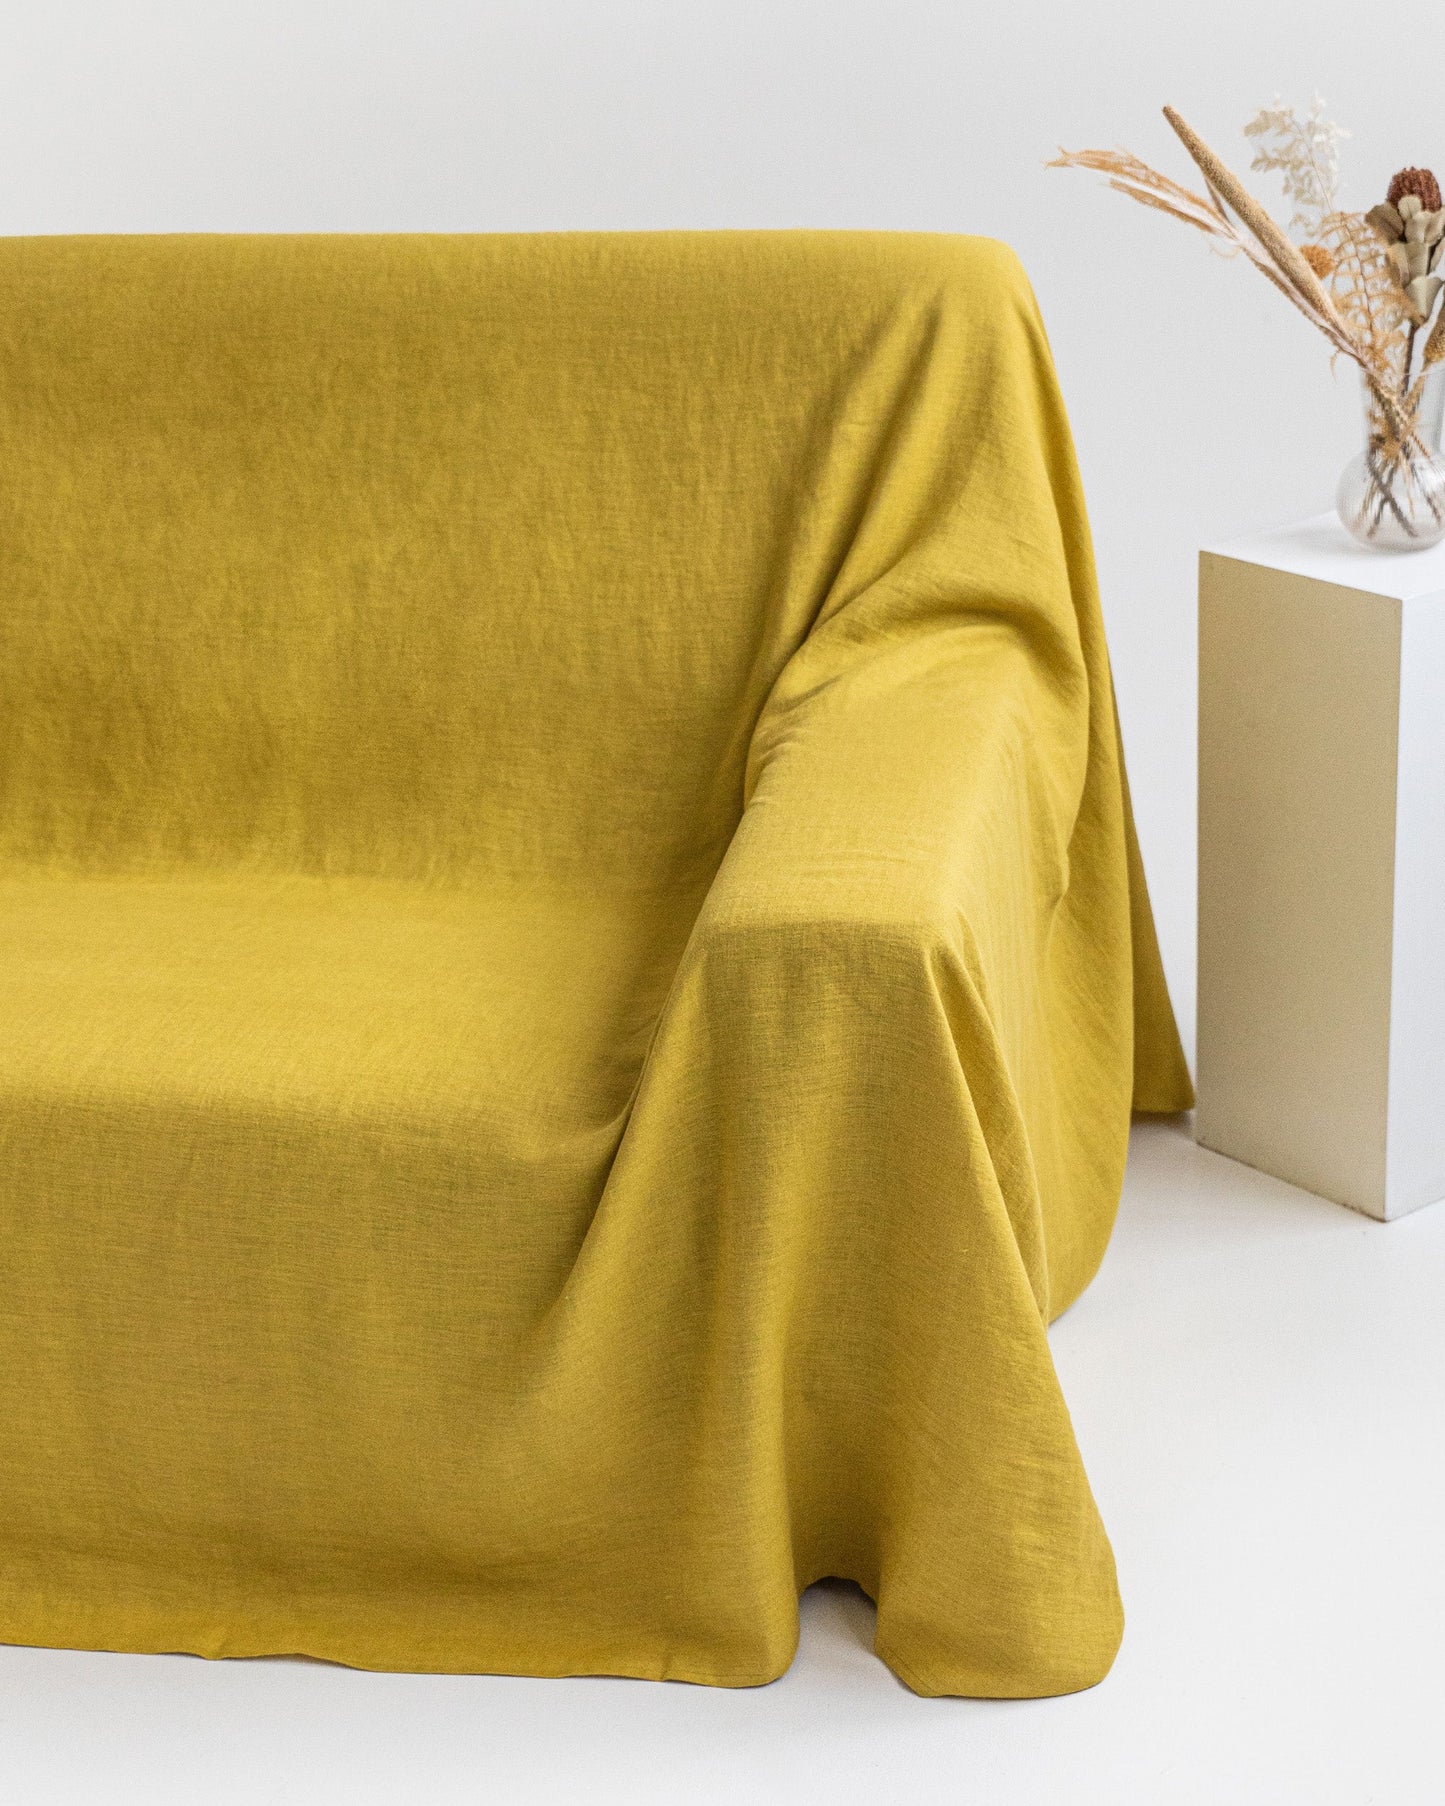 Custom size linen couch cover in Moss yellow - MagicLinen